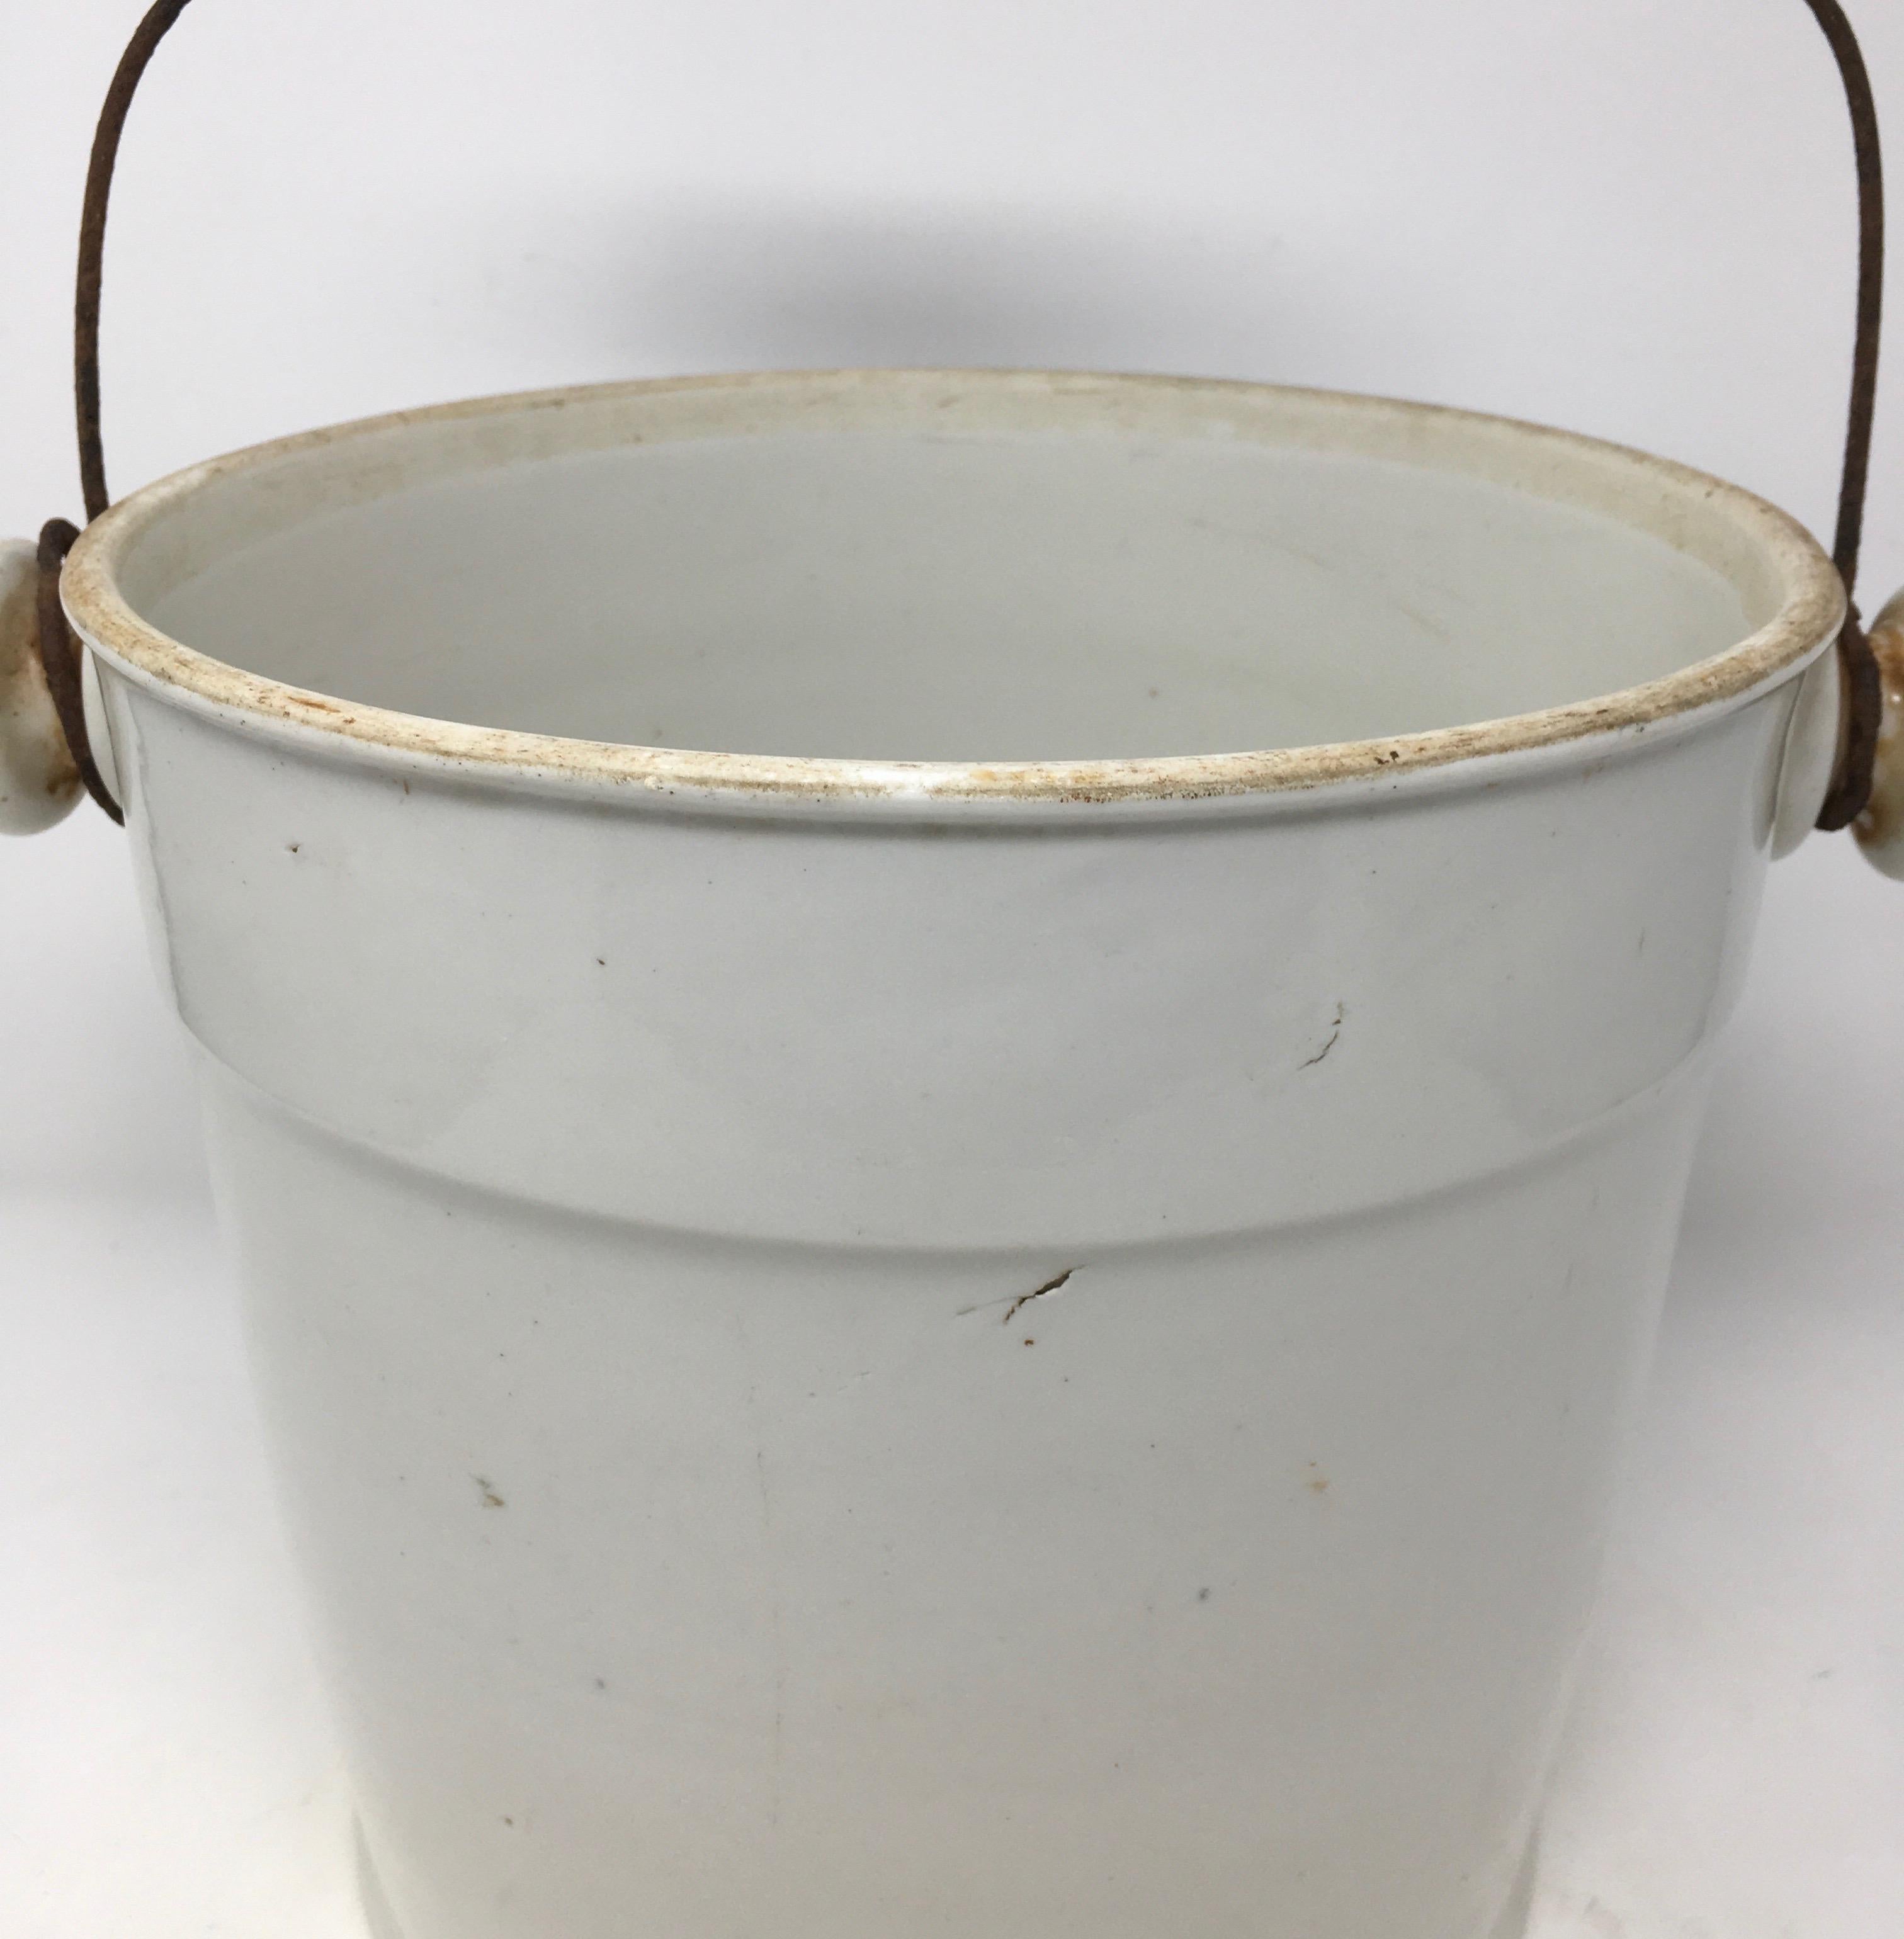 This Classic French Ironstone milk pail has a metal and wood handle. It is beautiful as is, or used to hold flowers.